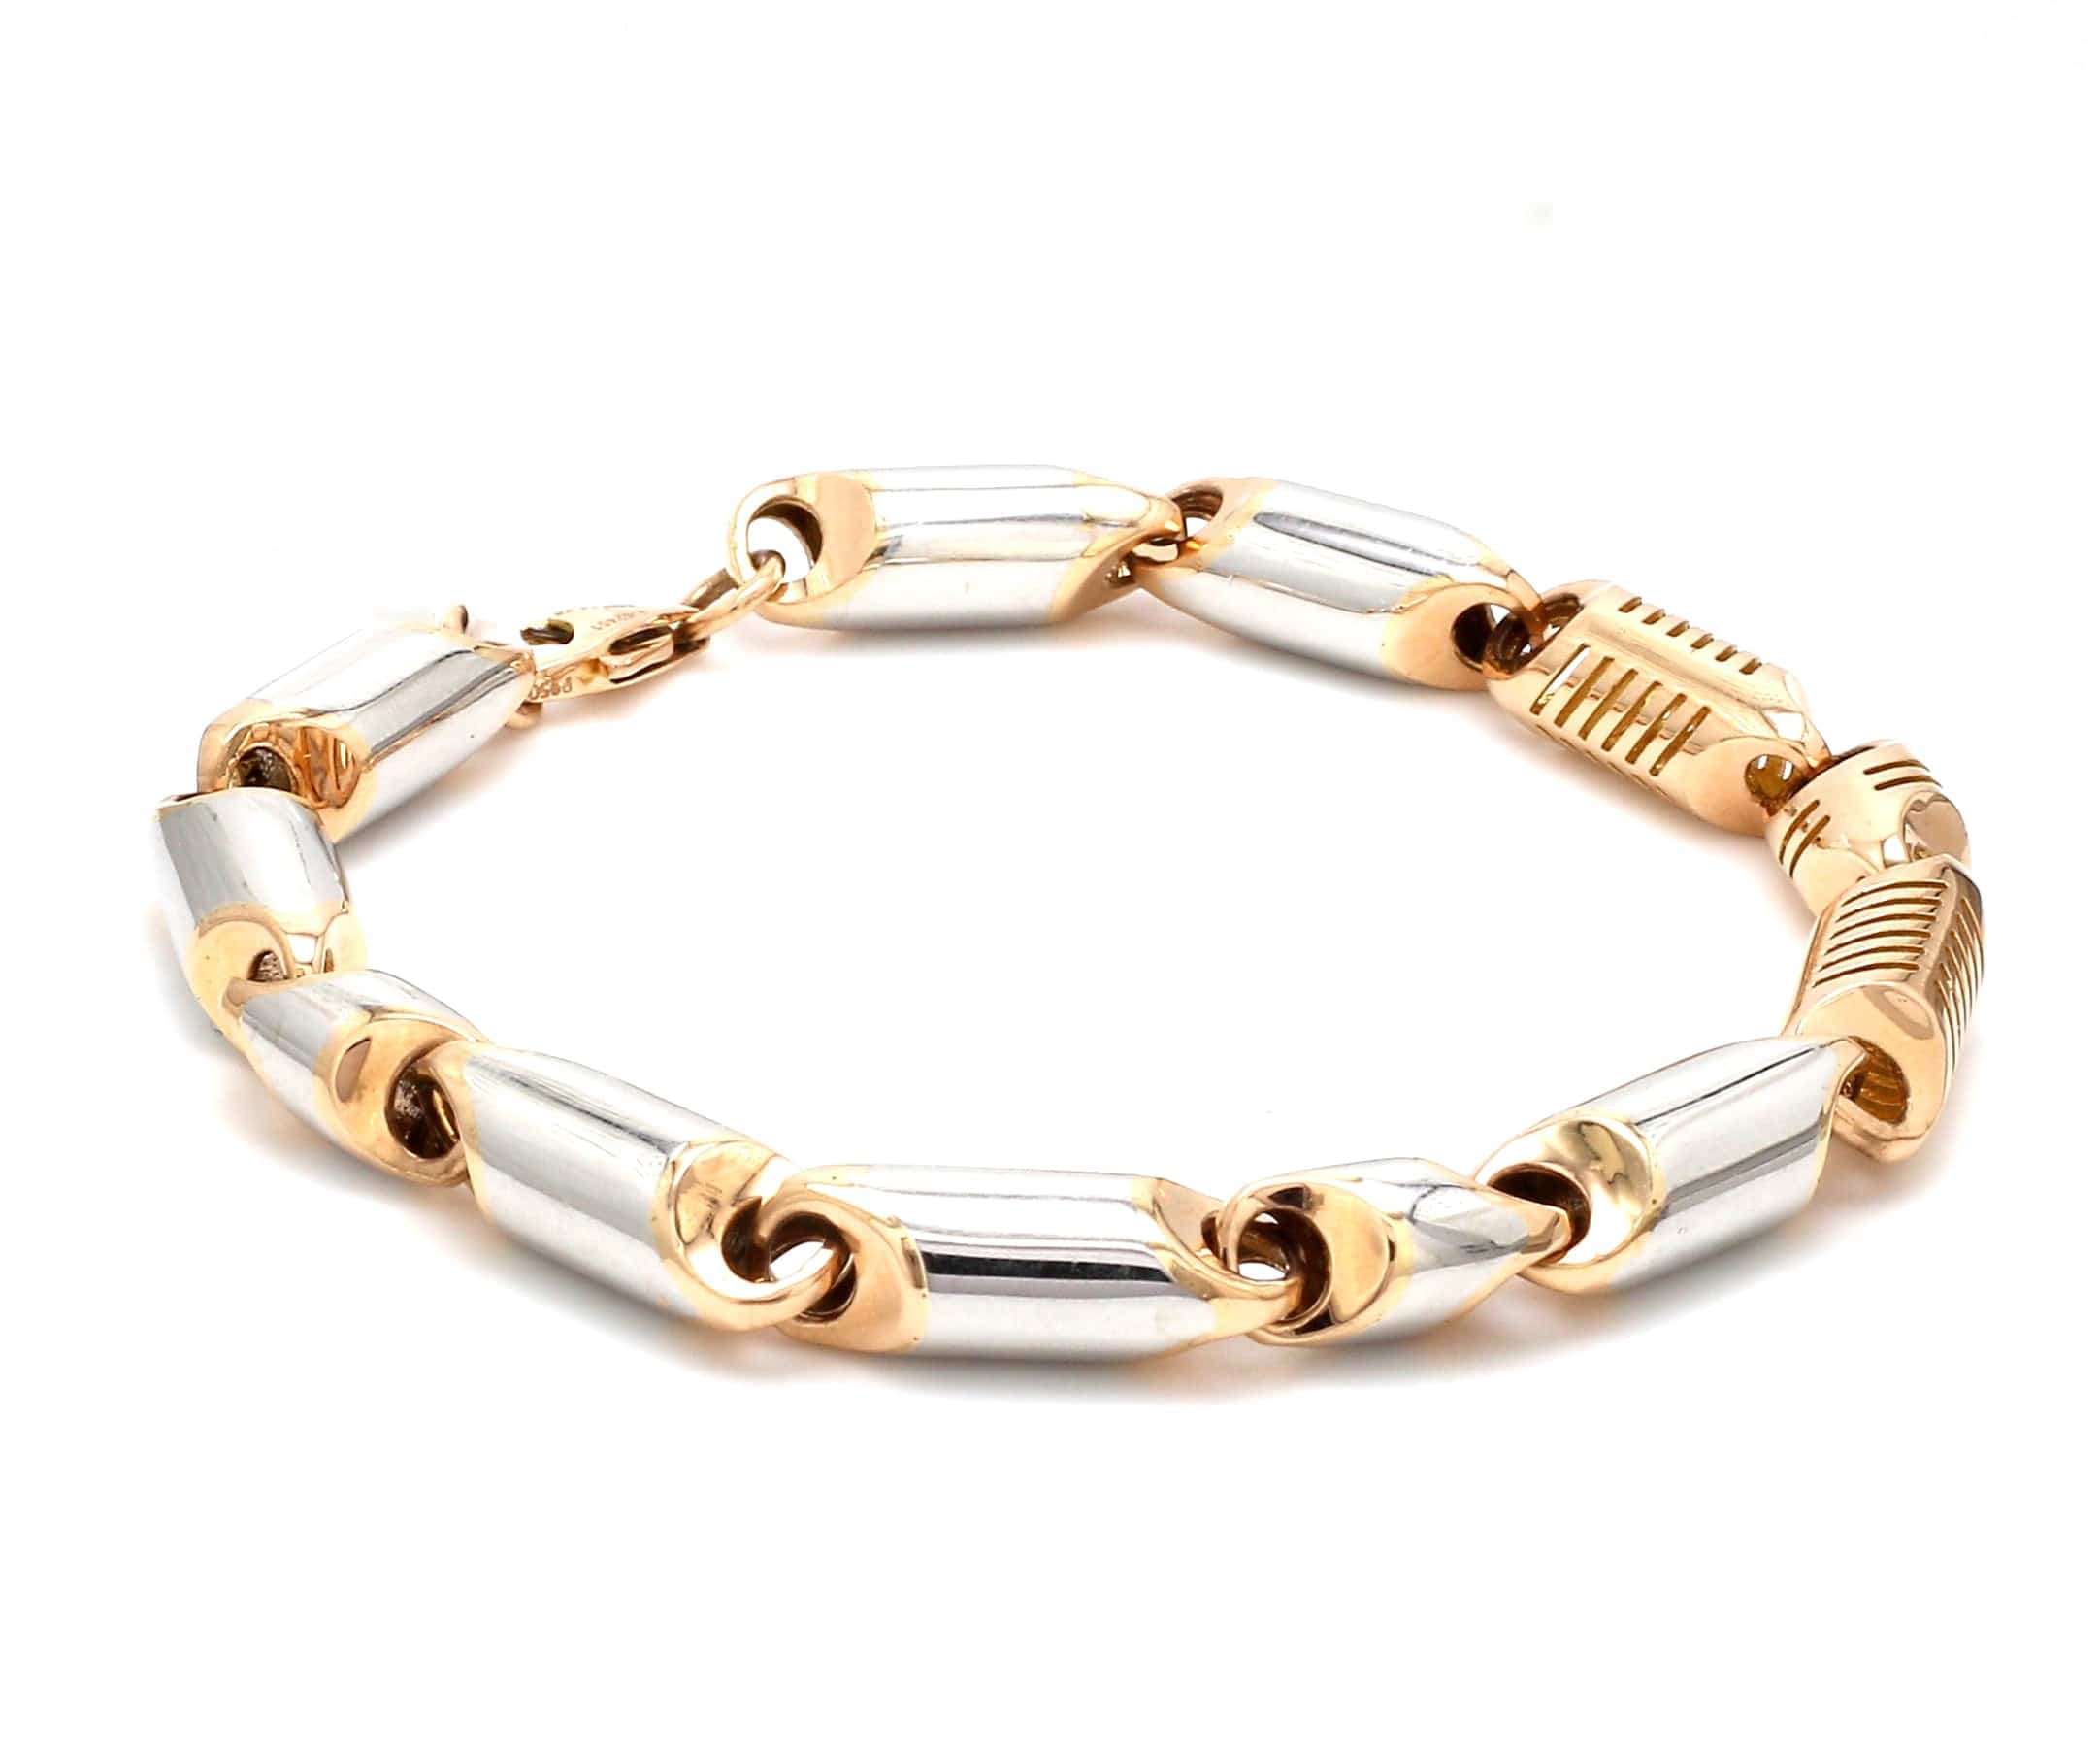 Buy MELORRA 18 kt Curvy Accents Gold Bangles at Amazon.in